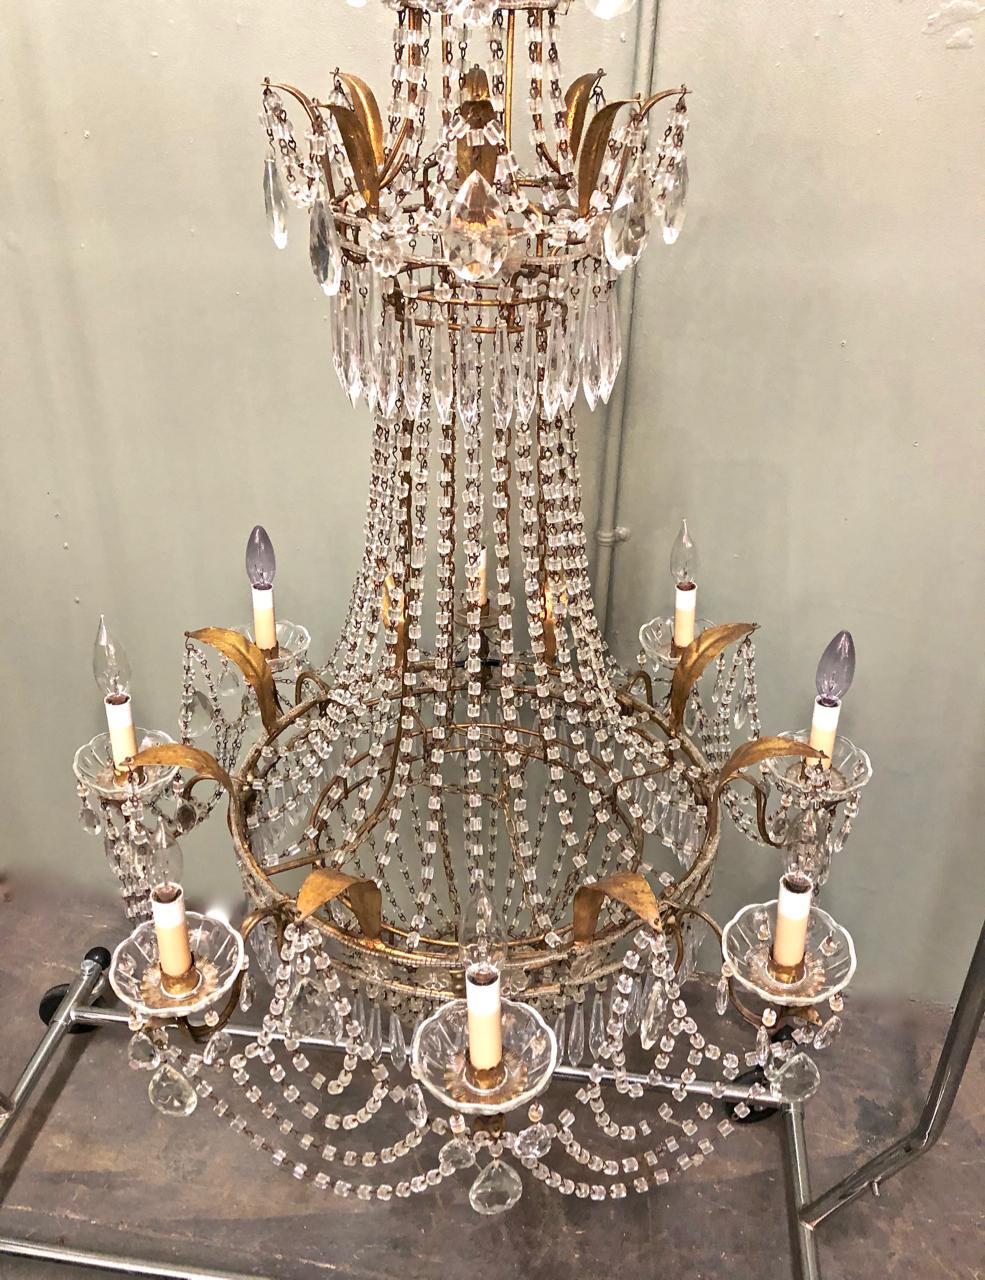 This is superb example of Italian creativity and craftsmanship. The chandelier derives its form from Classic Baltic Chandeliers of the 19th century, but it has been given a 20th century Italian twist with the addition of multi-swags of macaroni